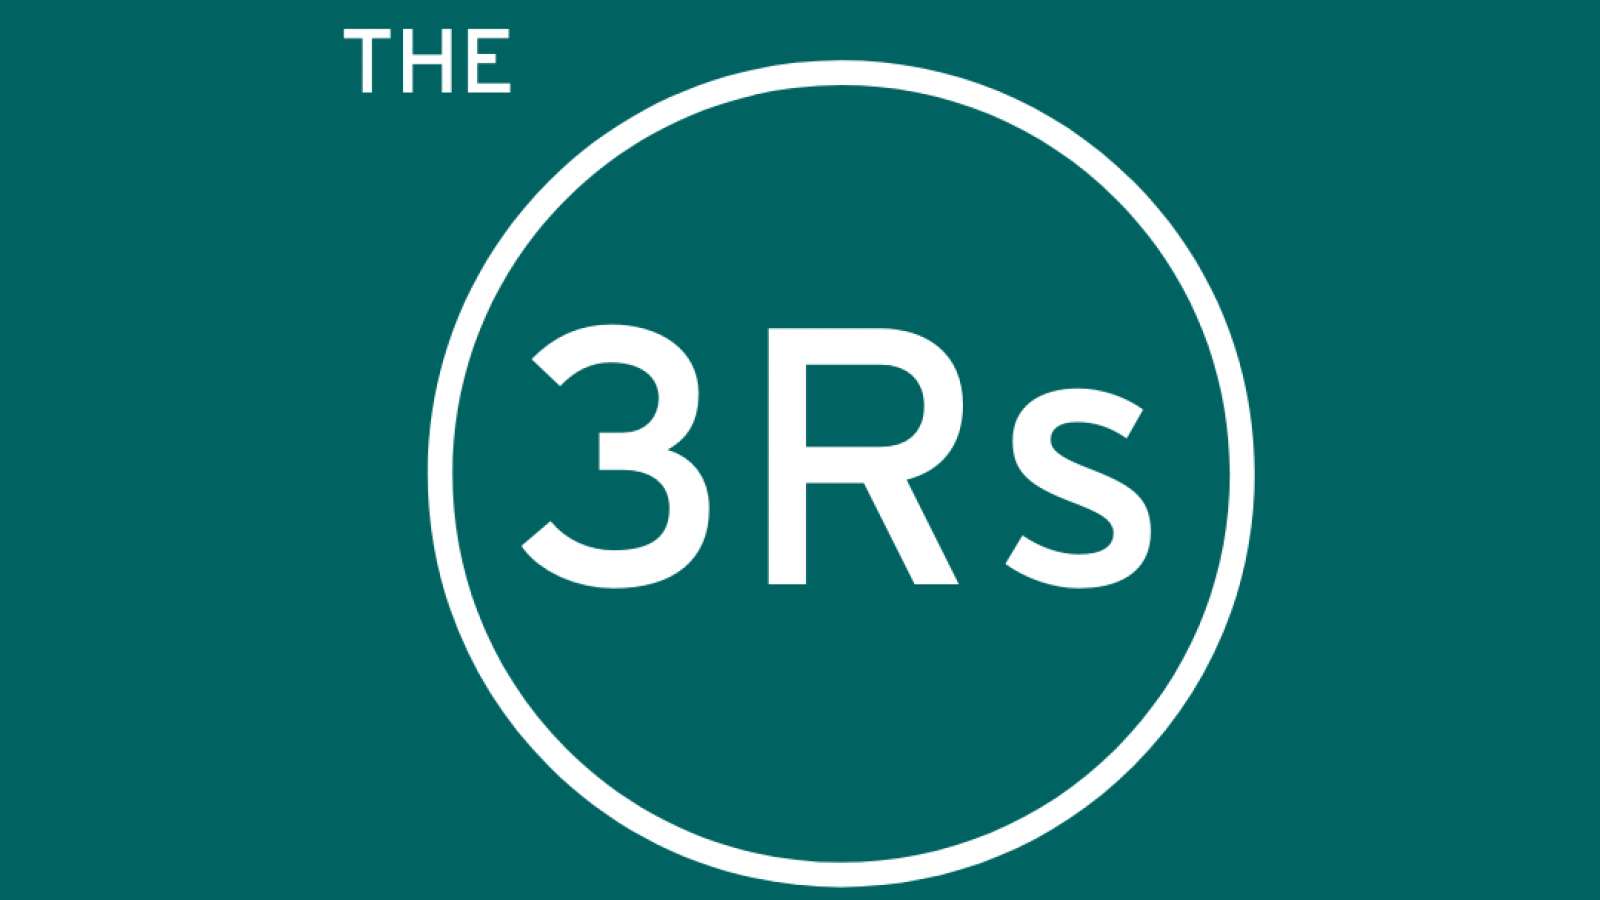 New investment in the 3Rs :: Understanding Animal Research